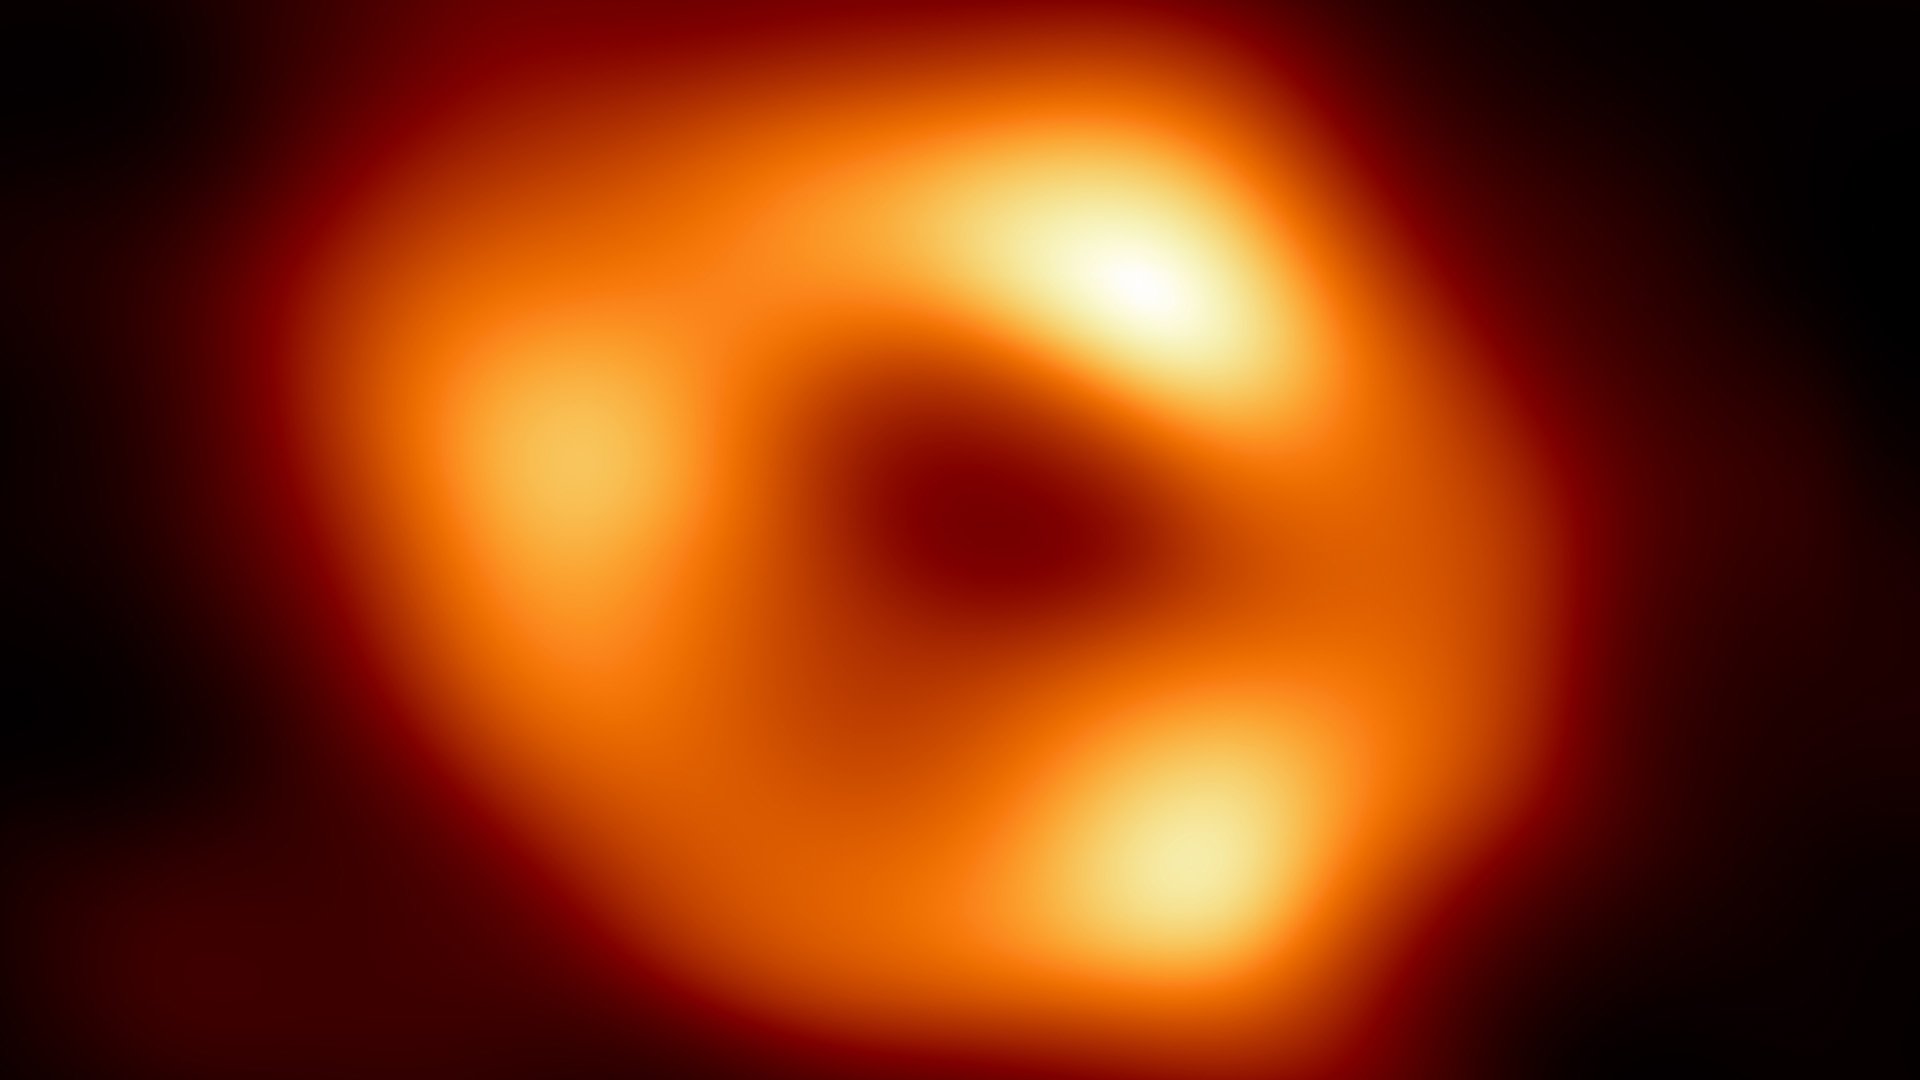 The black hole that lies at the centre of the Milky Way galaxy. Image: Event Horizon Telescope collaboration.